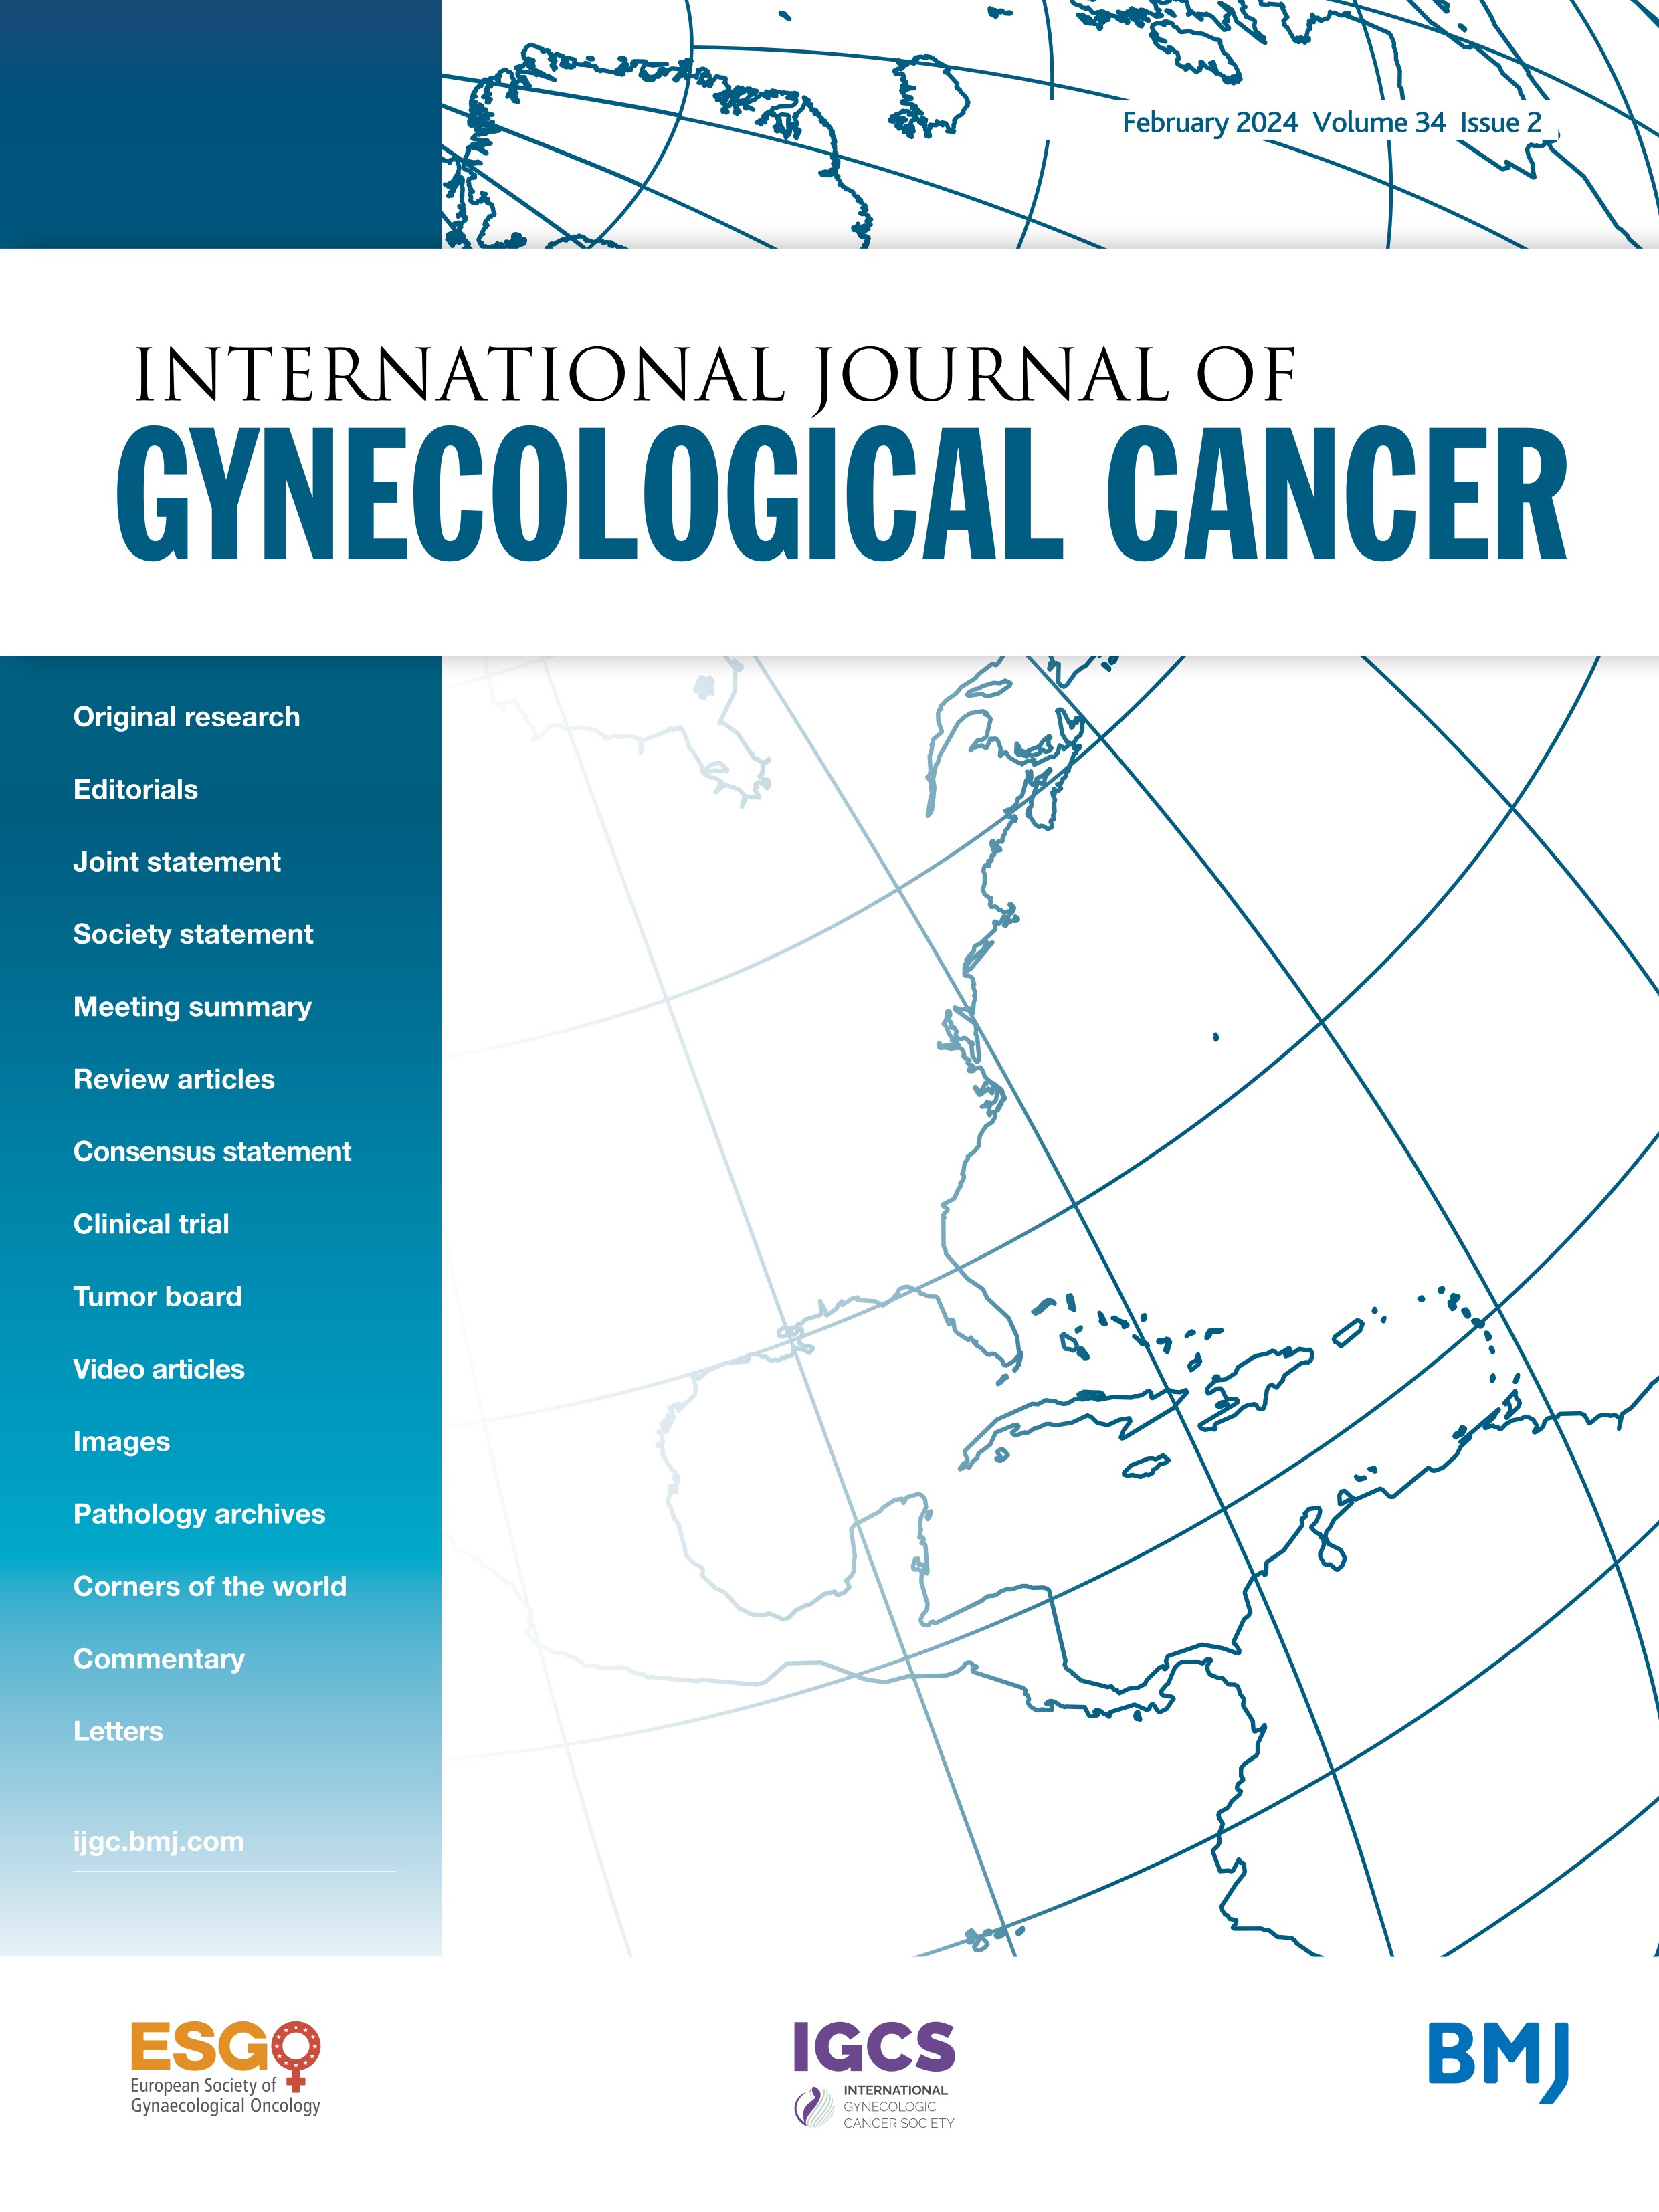 Circulating cell-free DNA as a diagnostic and prognostic marker for cervical cancer